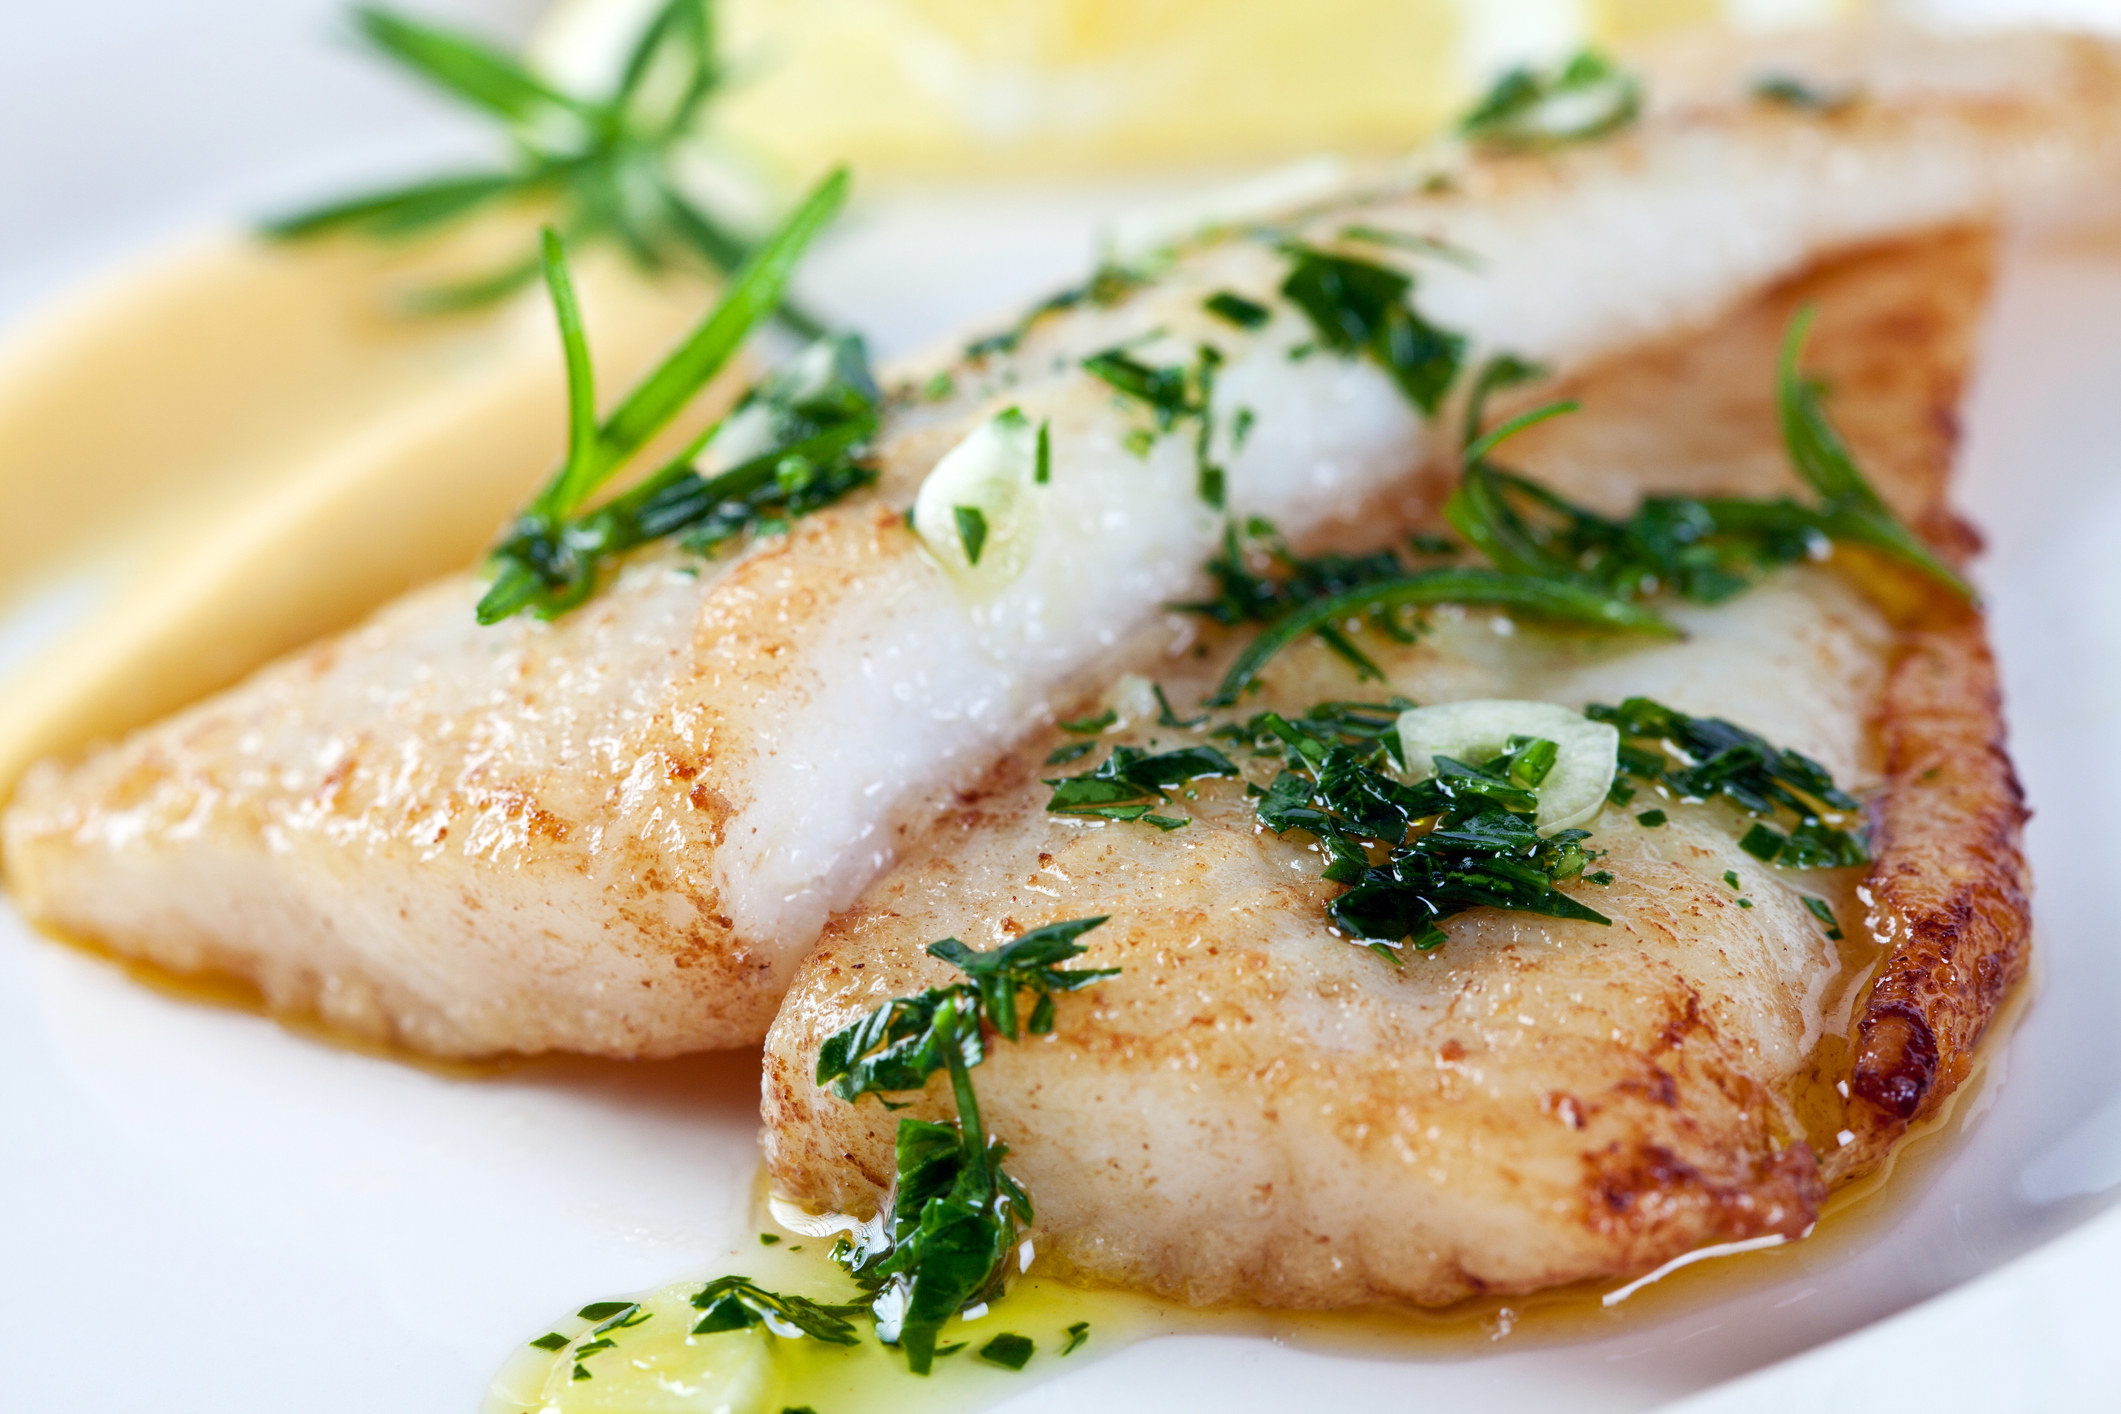 Fillet of white fish with parsley.